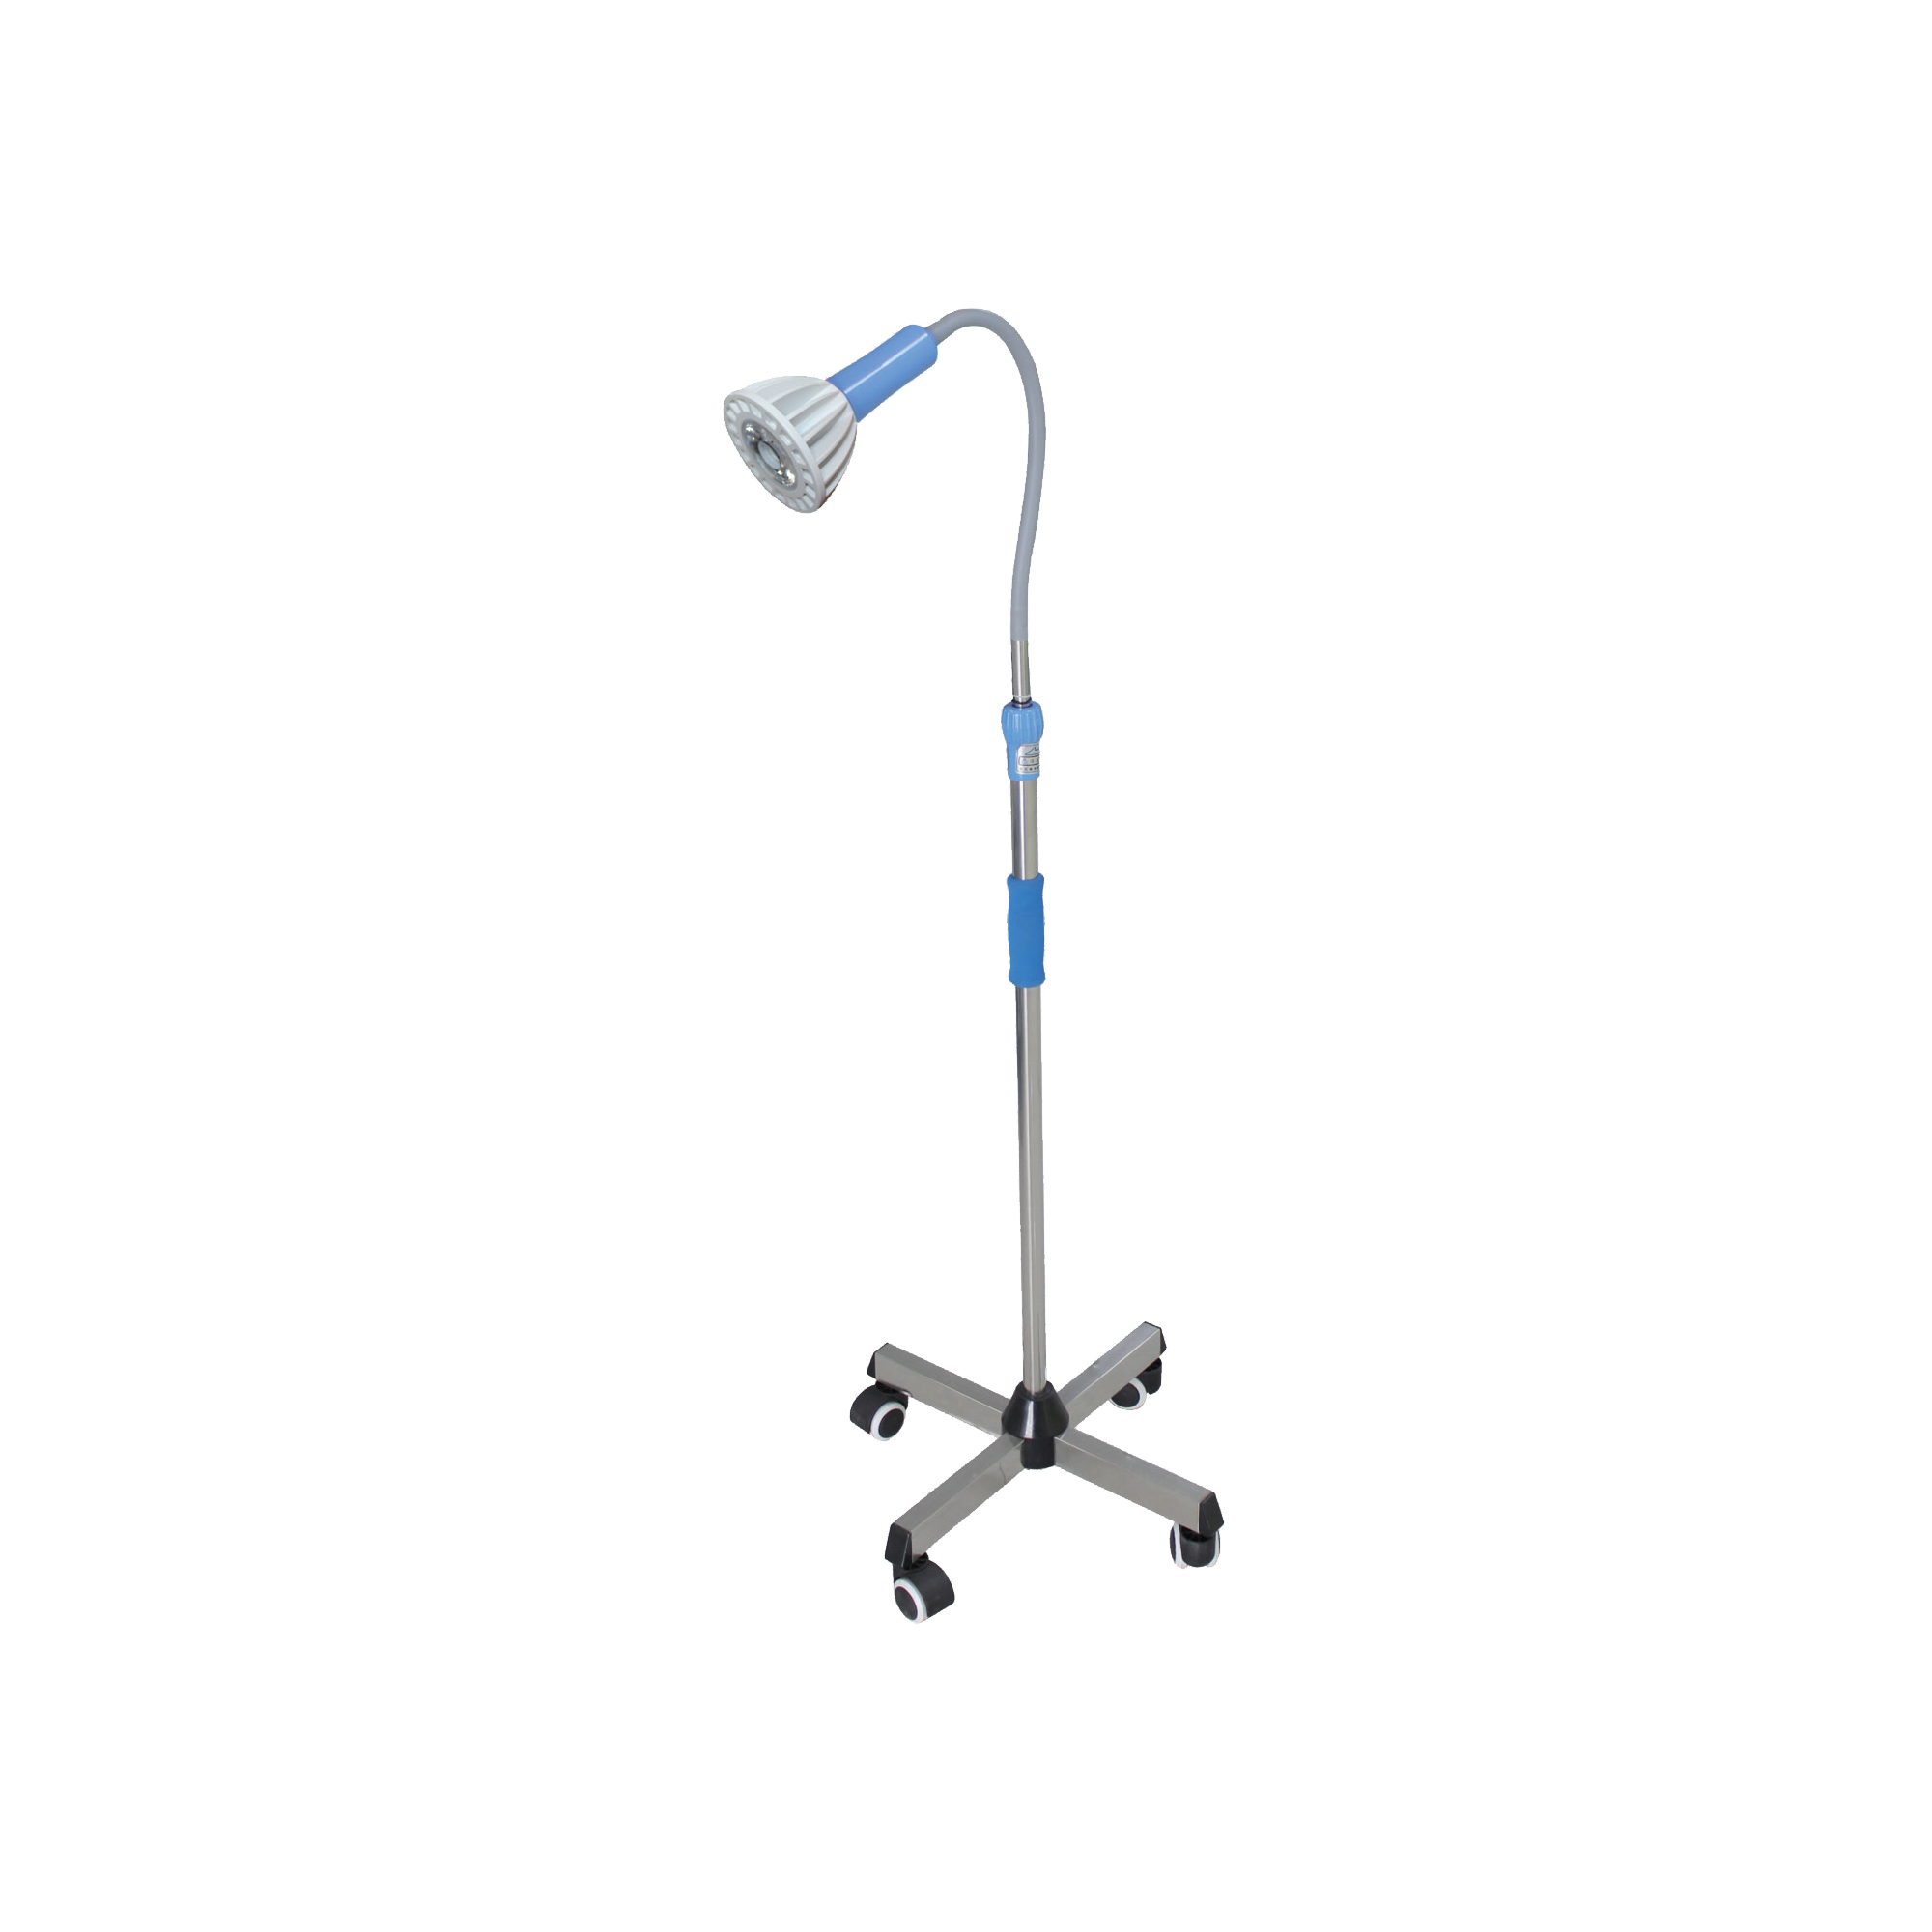 Flower Medical  FDL Gynecology Led Medical Surgical Check Examination Light,Mobile Blue Cold Dental Therapy Exam Lamp